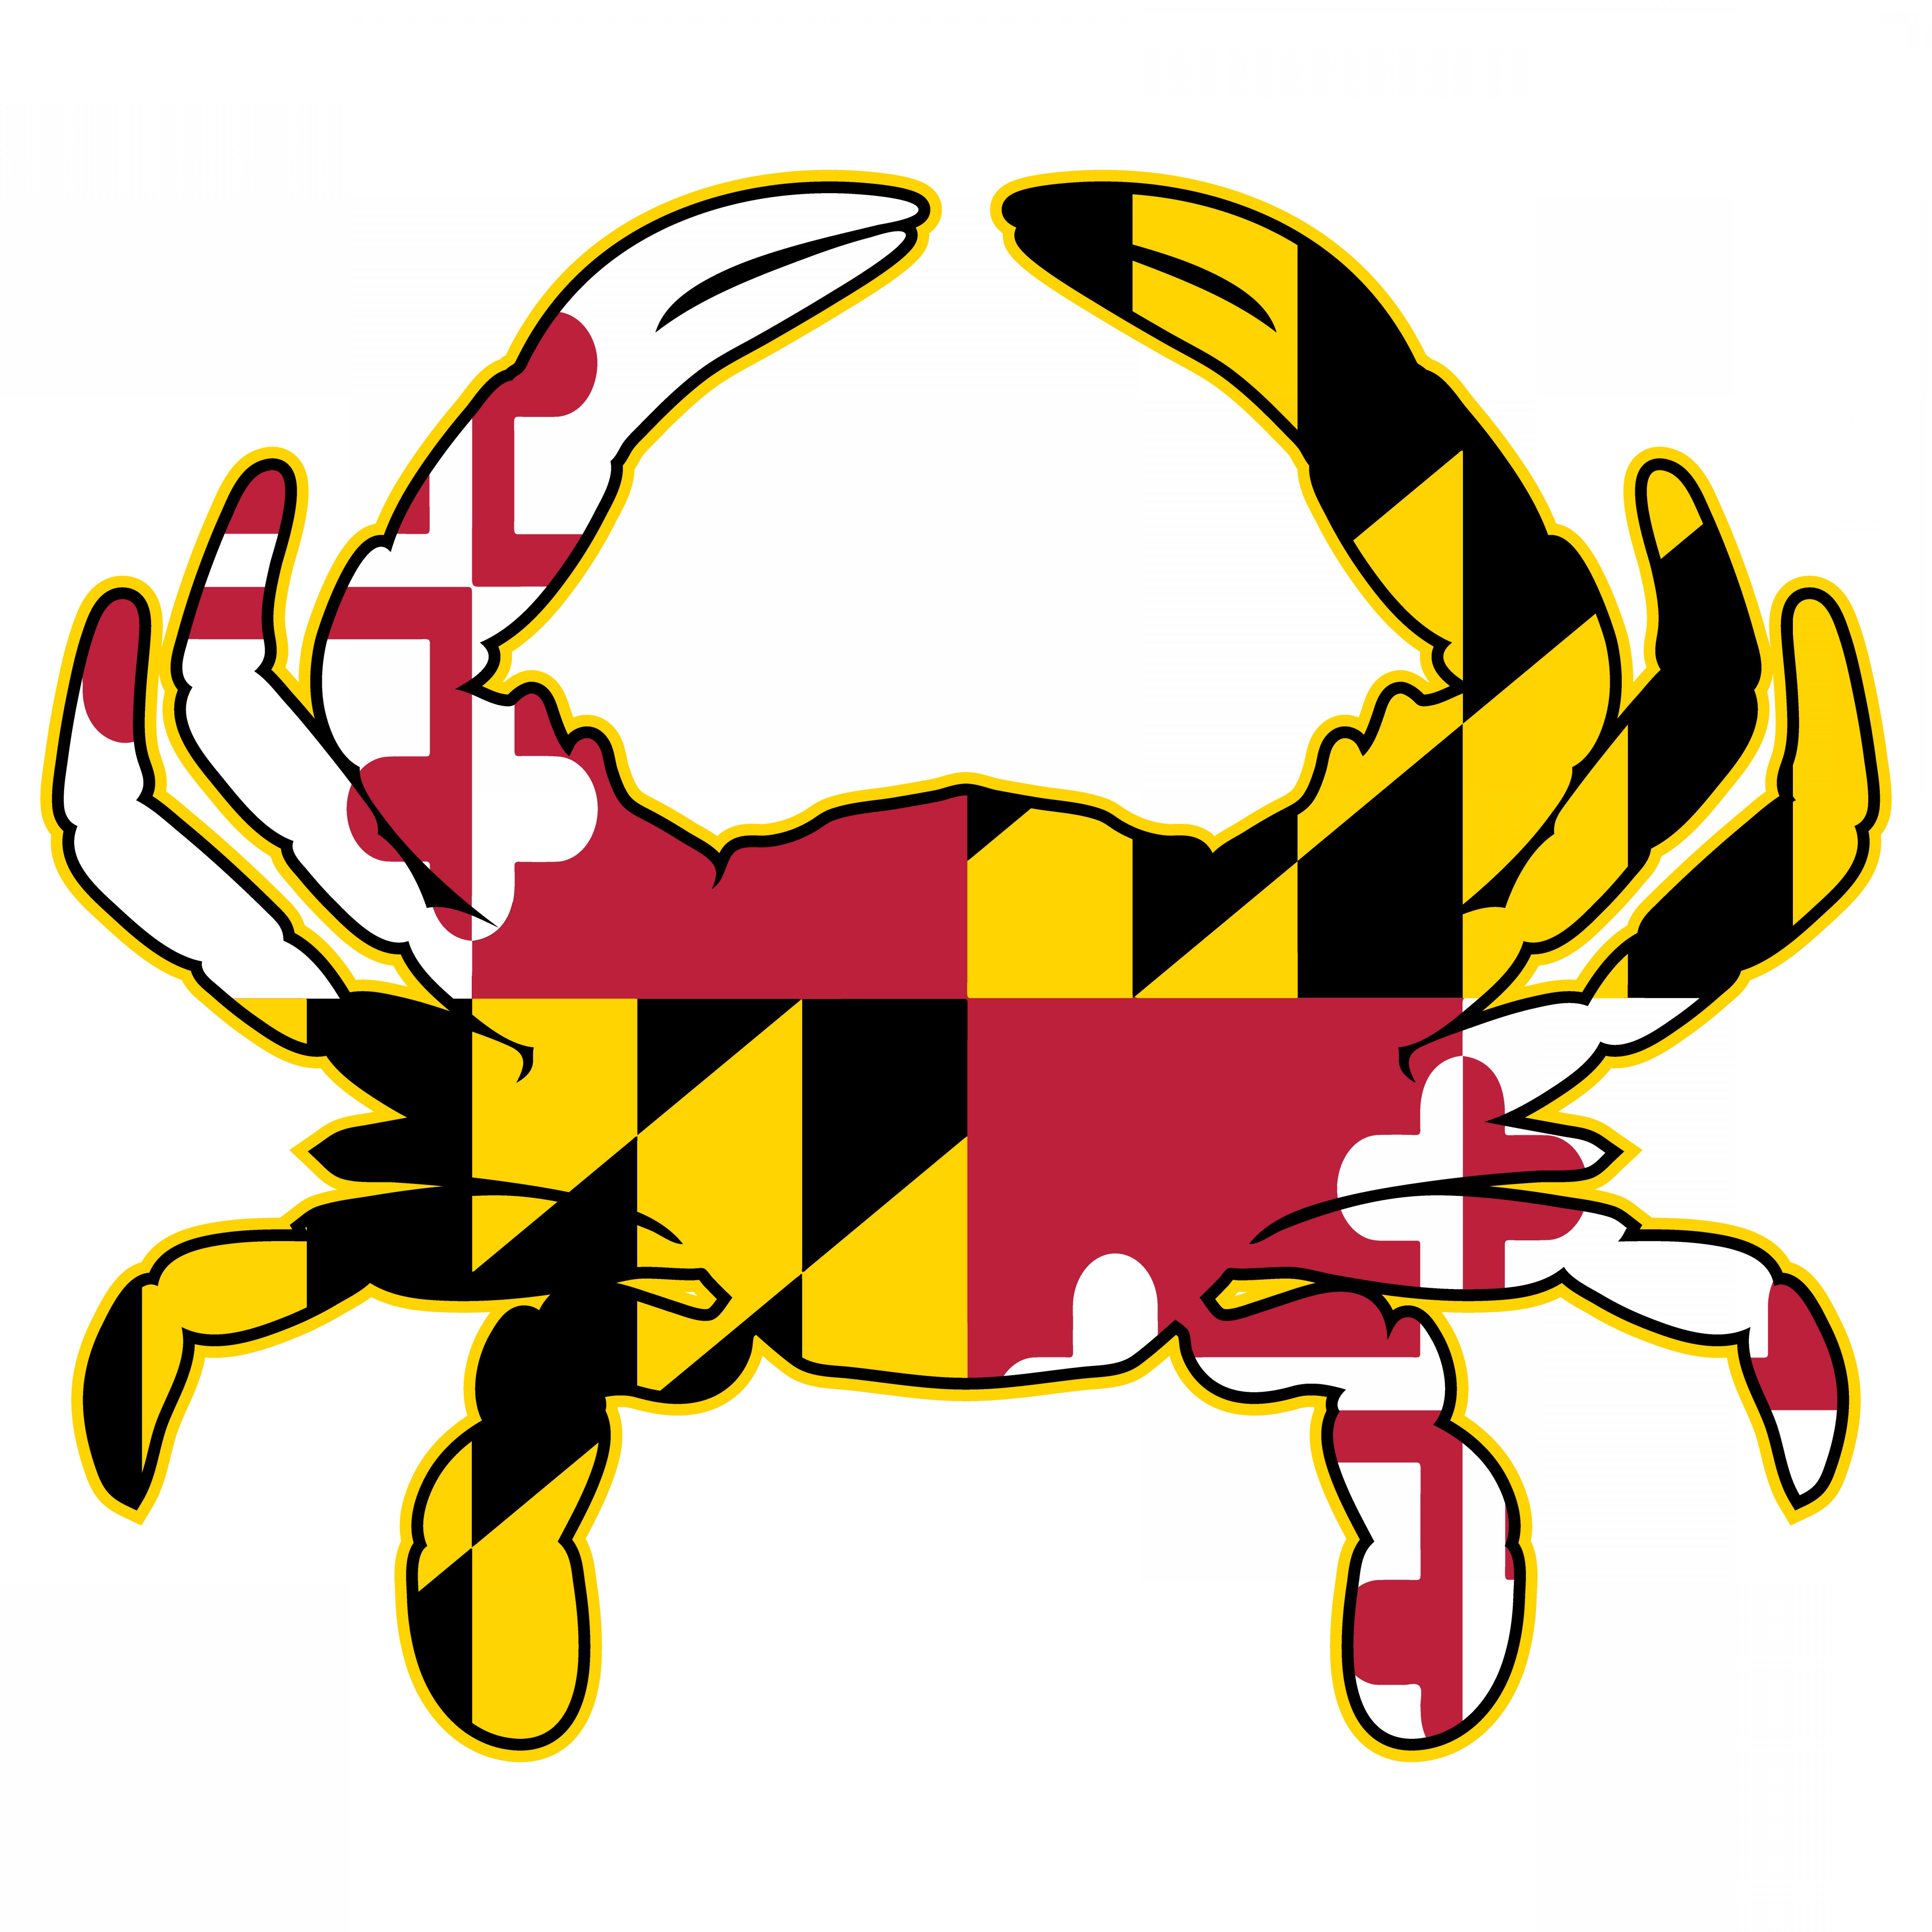 Download Vector Maryland at Vectorified.com | Collection of Vector ...